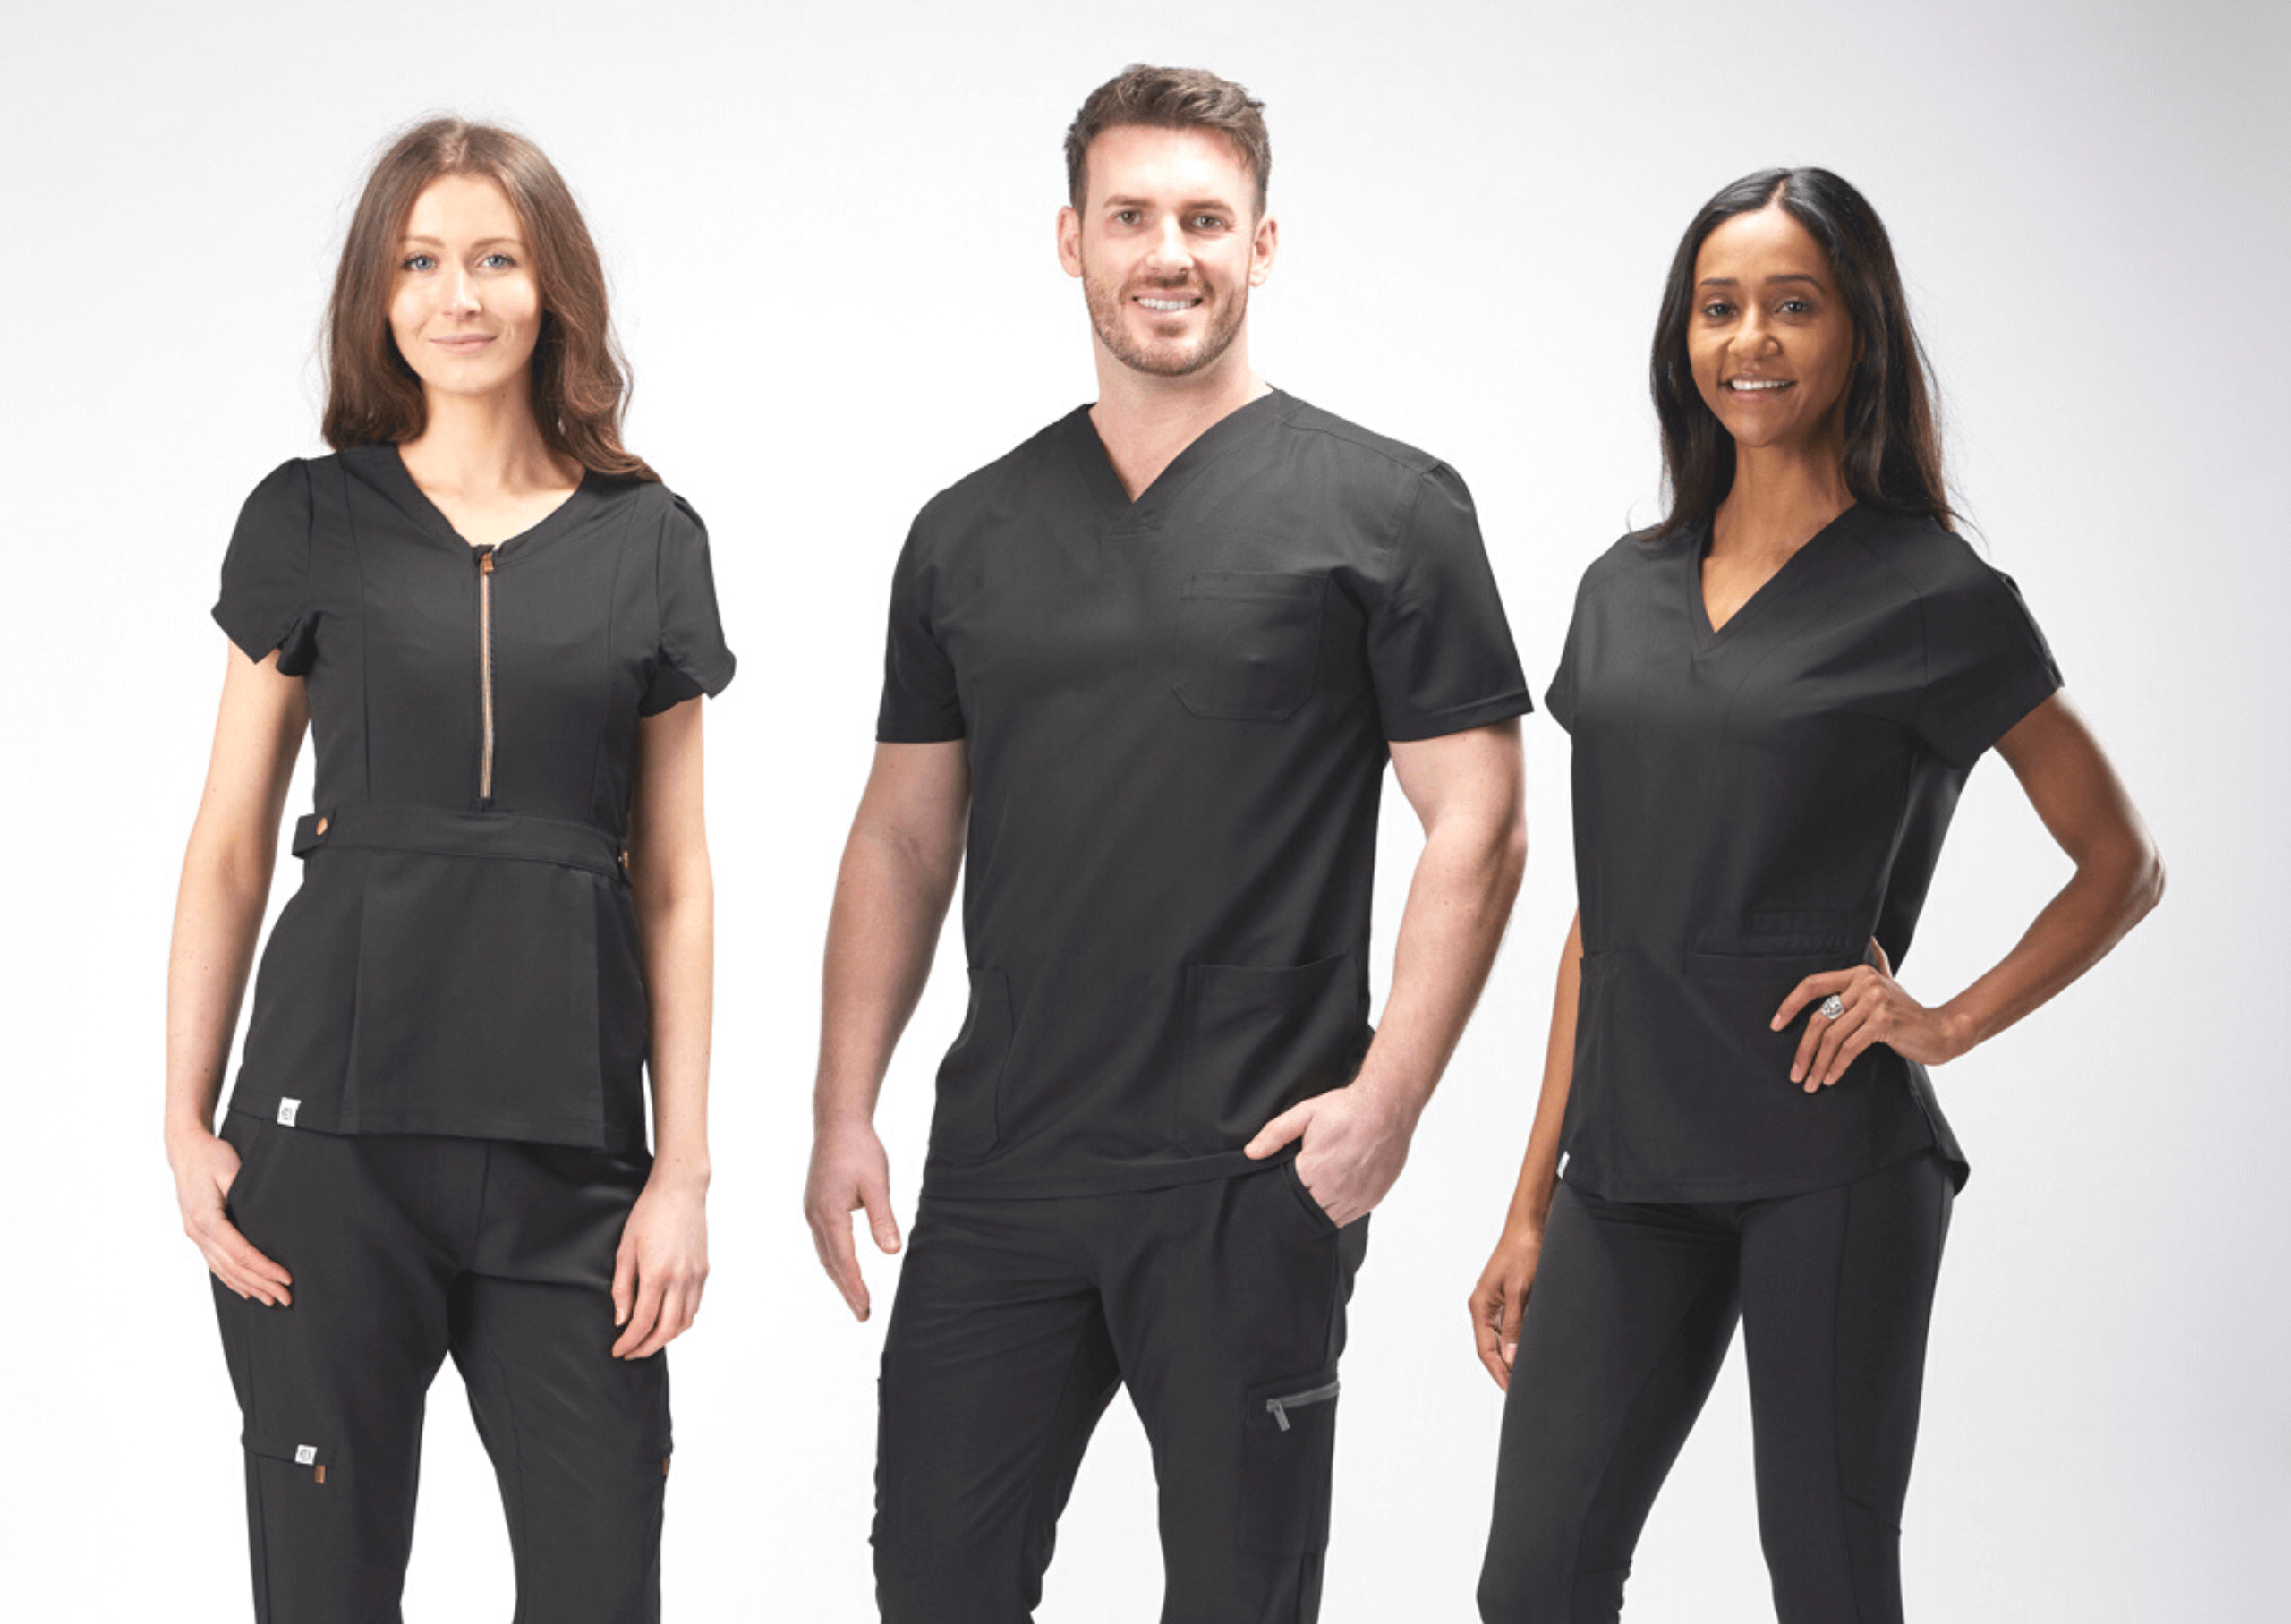 6 Helpful Tips For Ordering Team Scrubs For Your Clinic